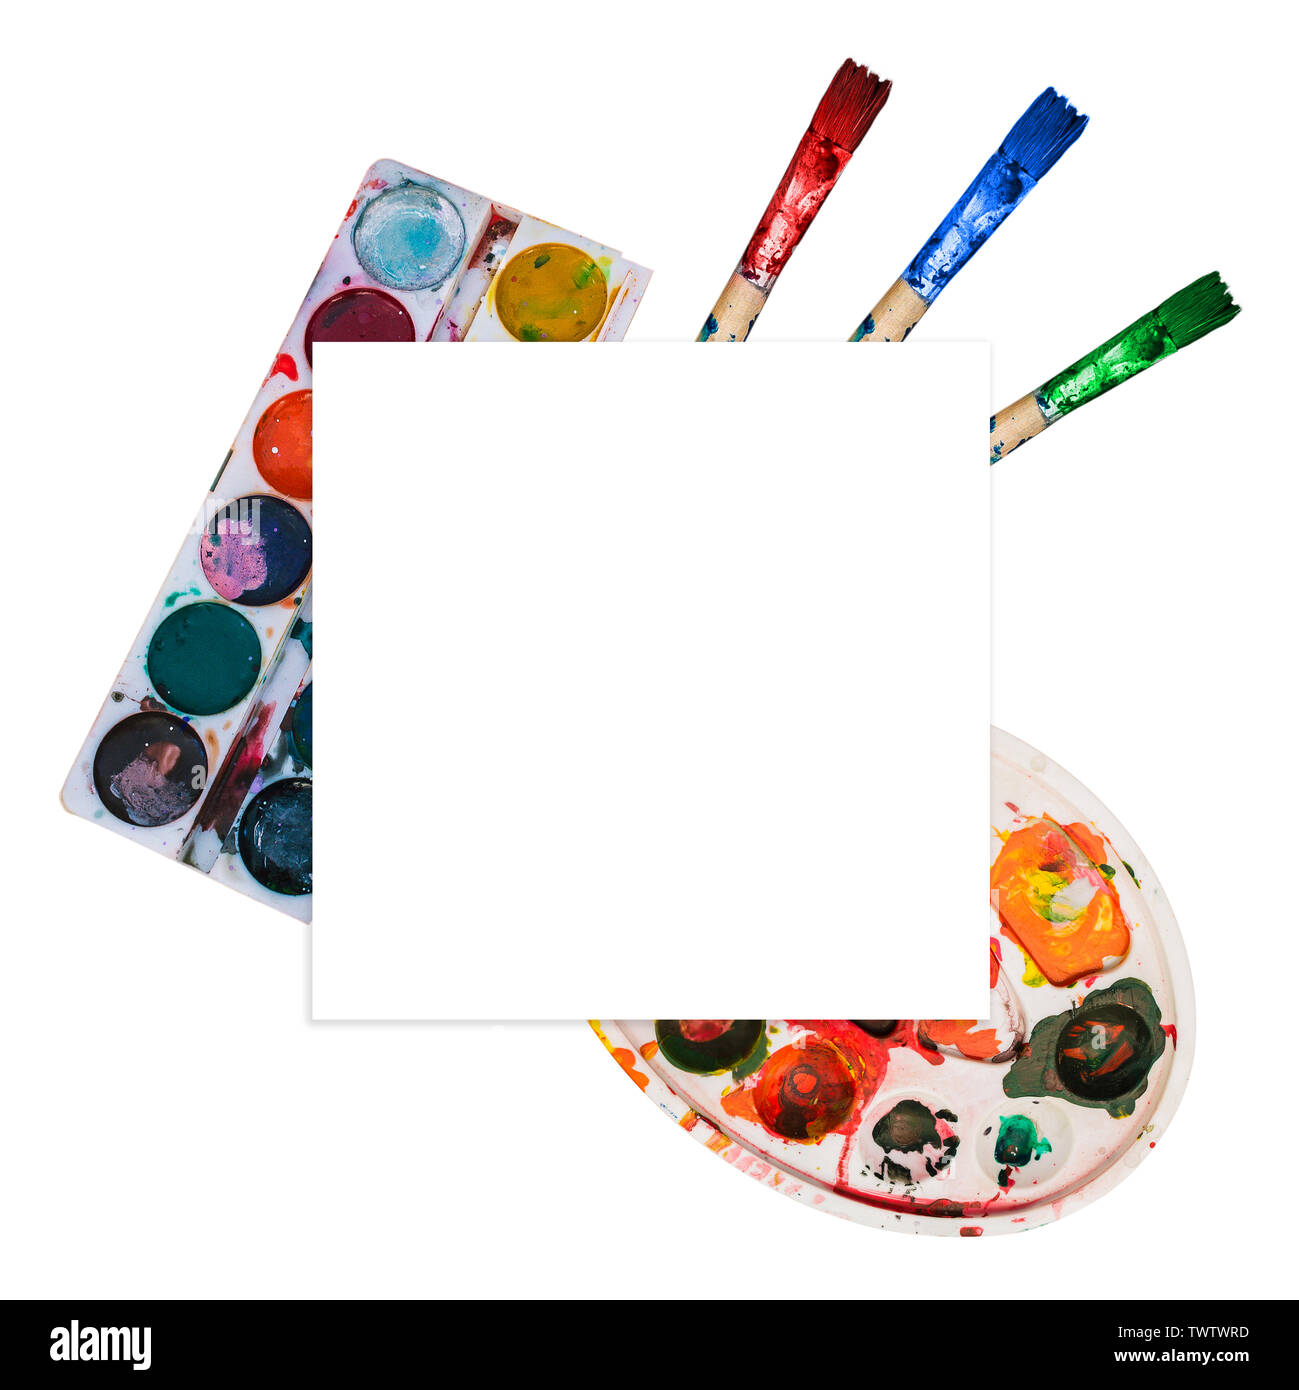 https://c8.alamy.com/comp/TWTWRD/paint-brushes-and-palettes-with-different-colors-of-paint-natural-colors-spots-on-the-palette-template-for-creativity-art-drawing-education-TWTWRD.jpg